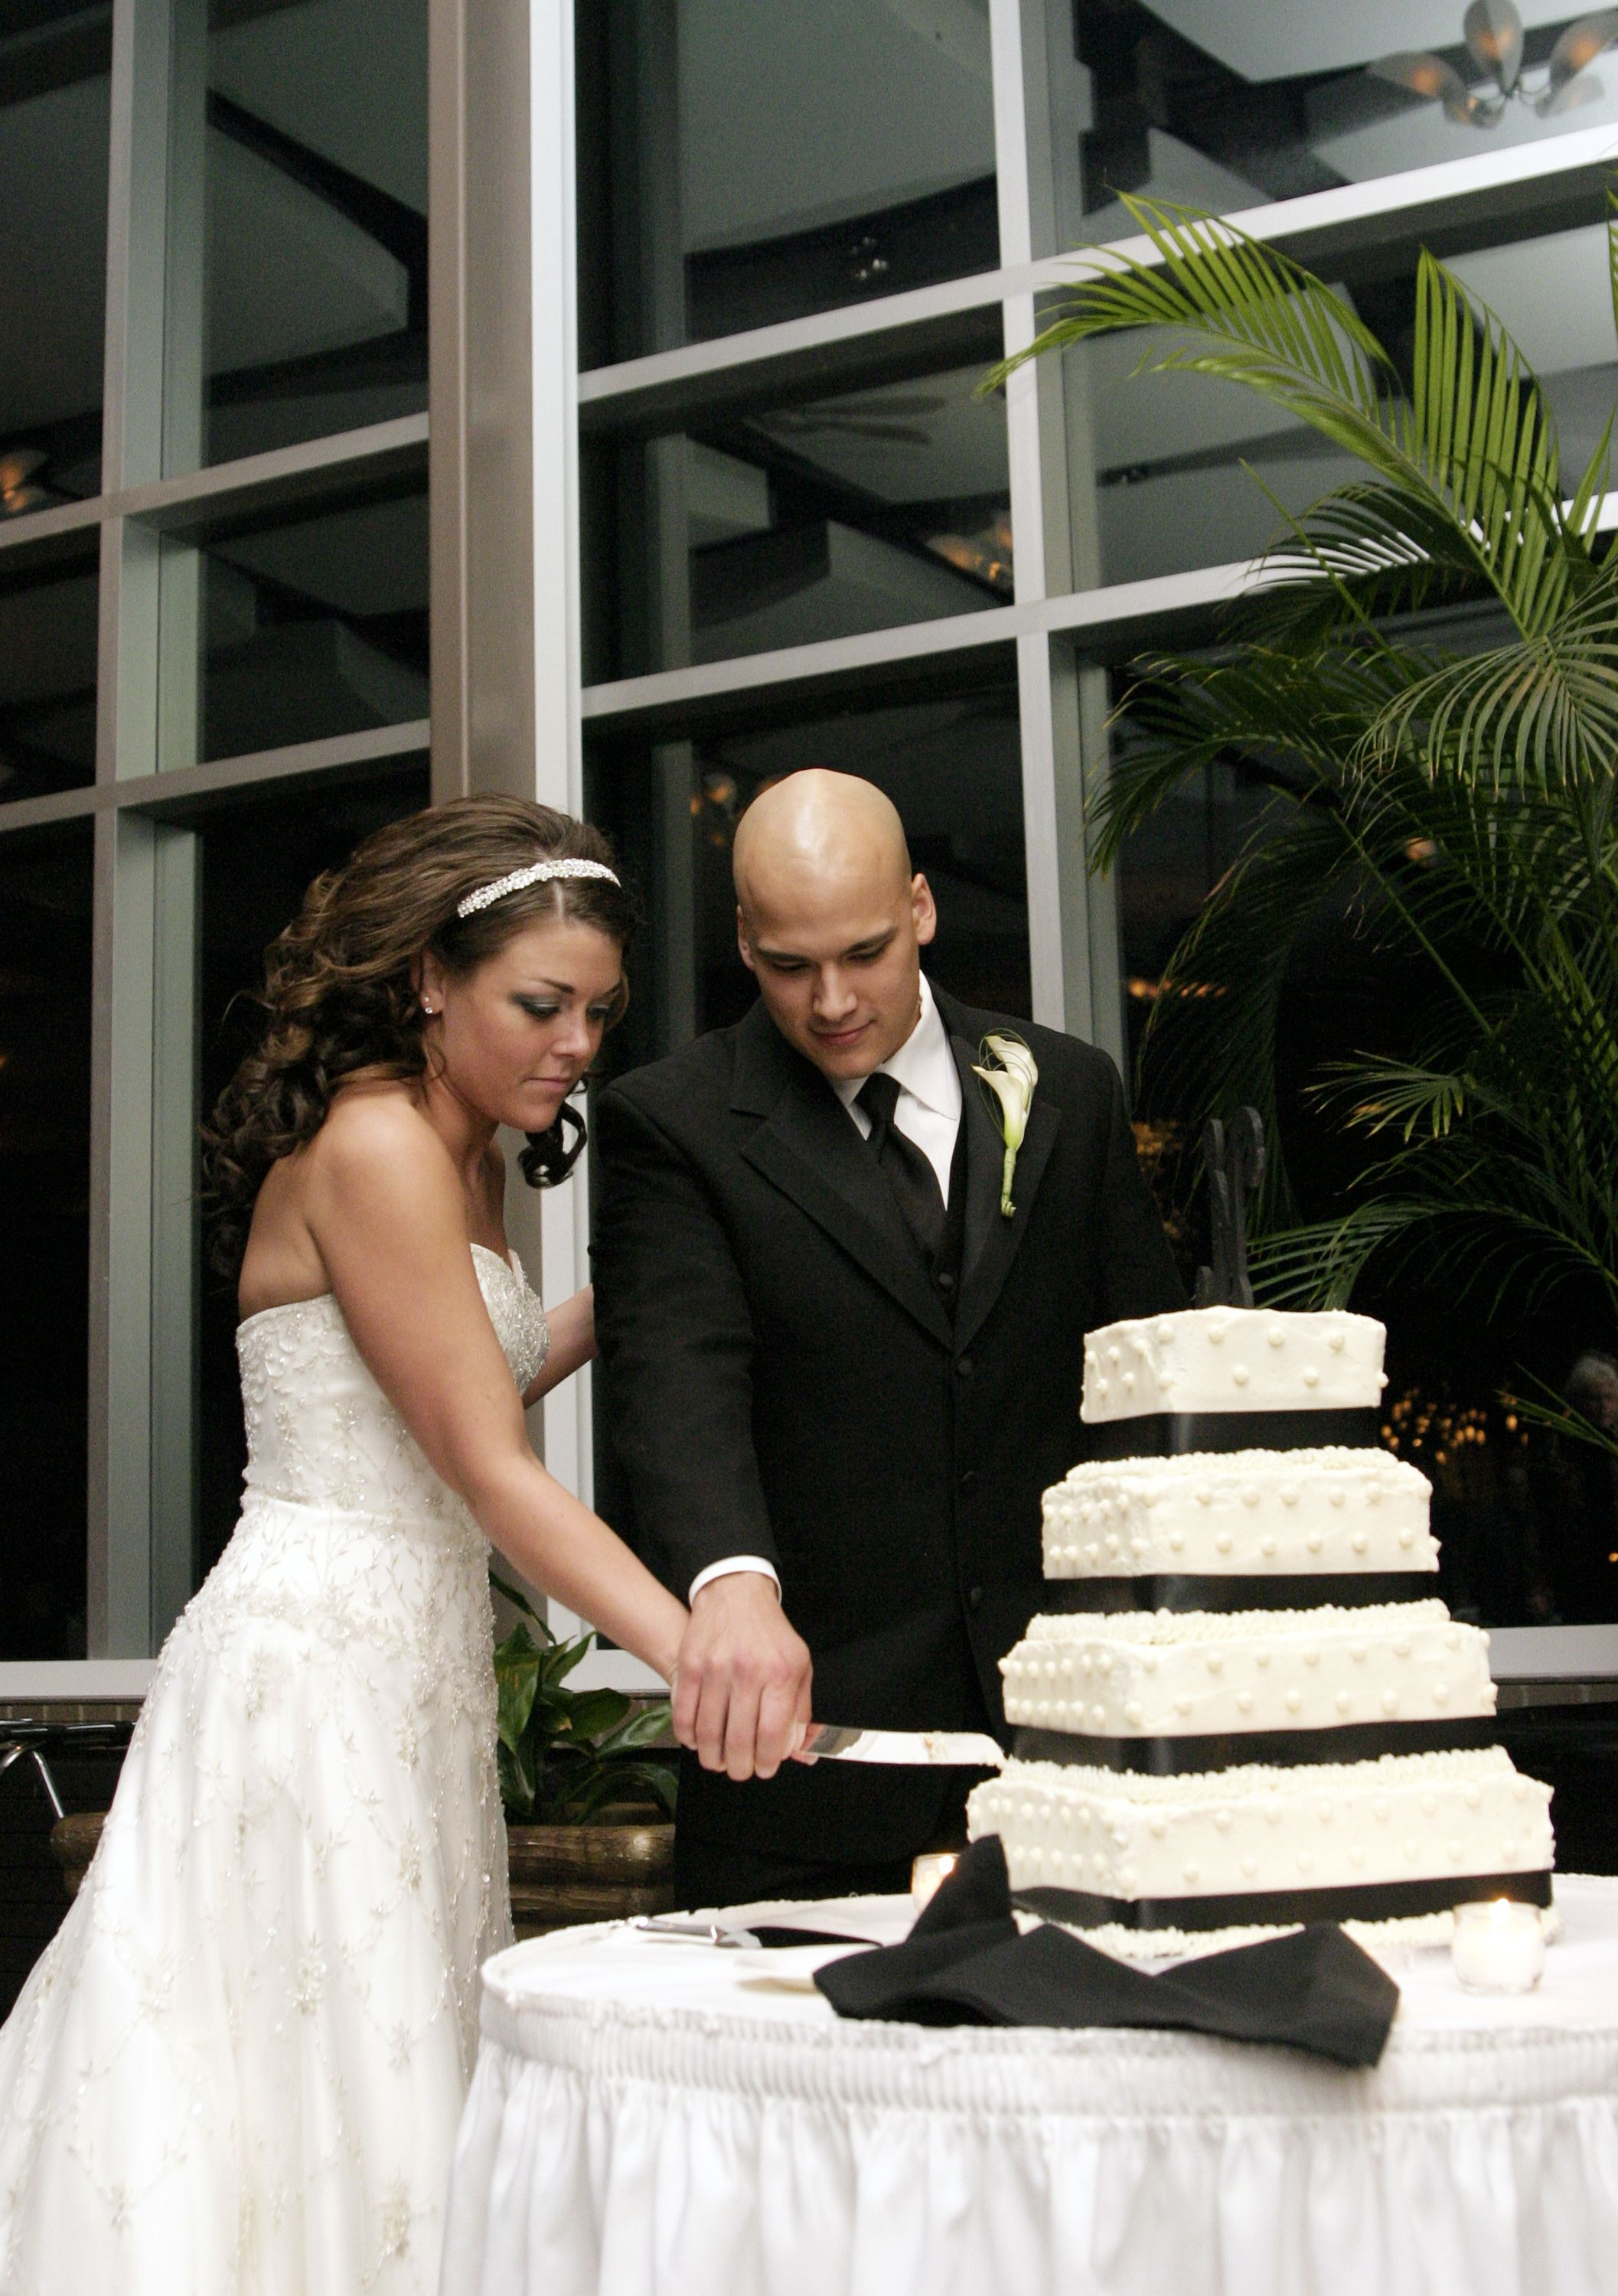 Meijers Wedding Cakes
 Bride and Groom cutting black and white wedding cake